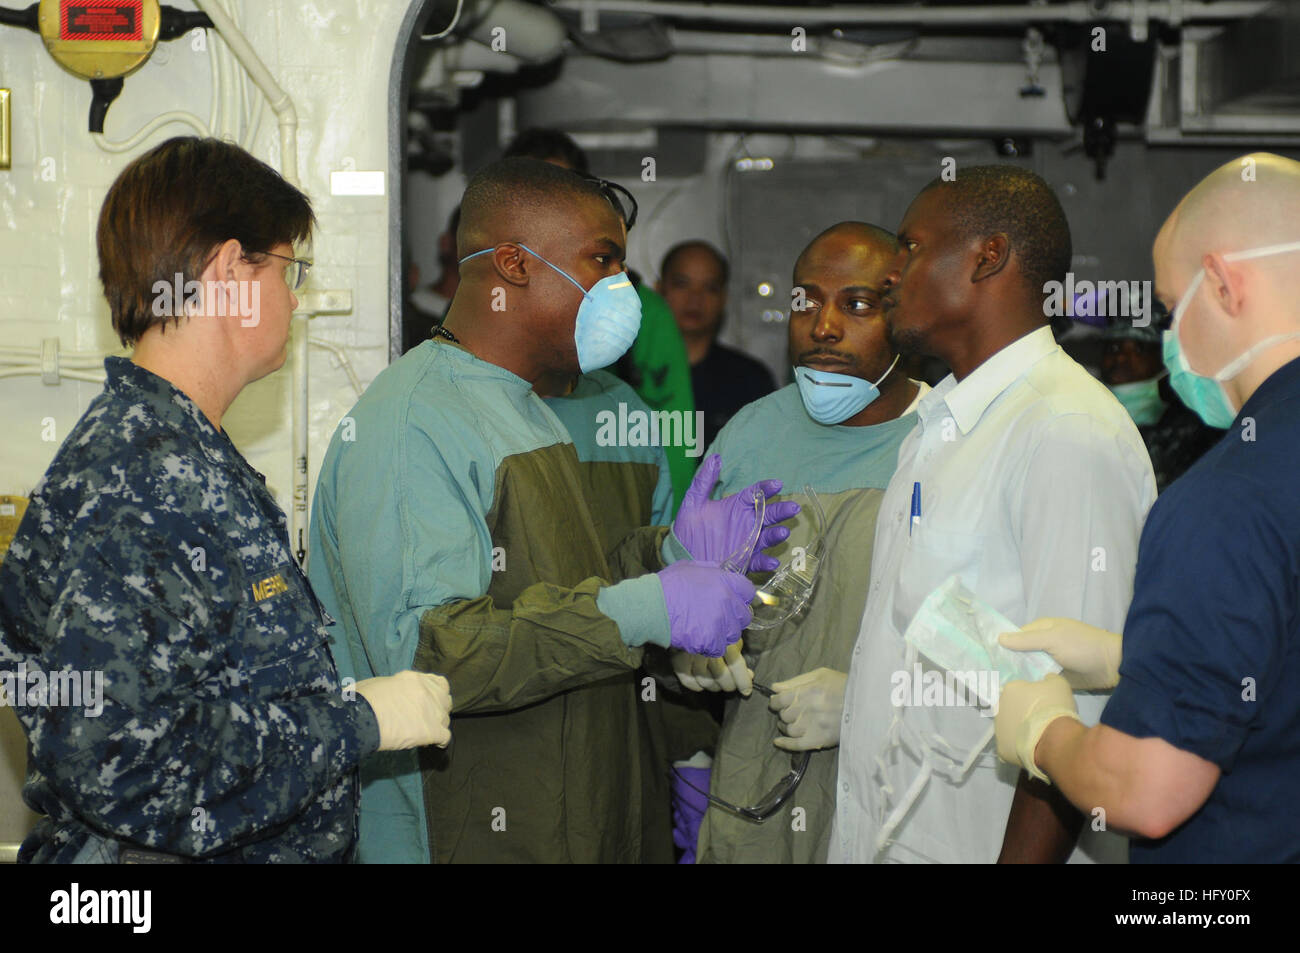 100119-N-1831S-062 PORT-AU-PRINCE, Haiti (Jan. 19, 2010) A Haitian man speaks with the medical staff aboard the multi-purpose amphibious assault ship USS Bataan (LHD 5) about his mother's condition. His 70-year-old mother was freed from a collapsed building Jan. 19, after being trapped under rubble for seven days. Bataan is supporting Operation Unified Response, a joint operation providing humanitarian assistance following a 7.0 magnitude earthquake that struck Haiti Jan. 12, 2010. (U.S. Navy photo by Mass Communication Specialist 3rd Class Ash Severe/Released) US Navy 100119-N-1831S-062 A Hai Stock Photo